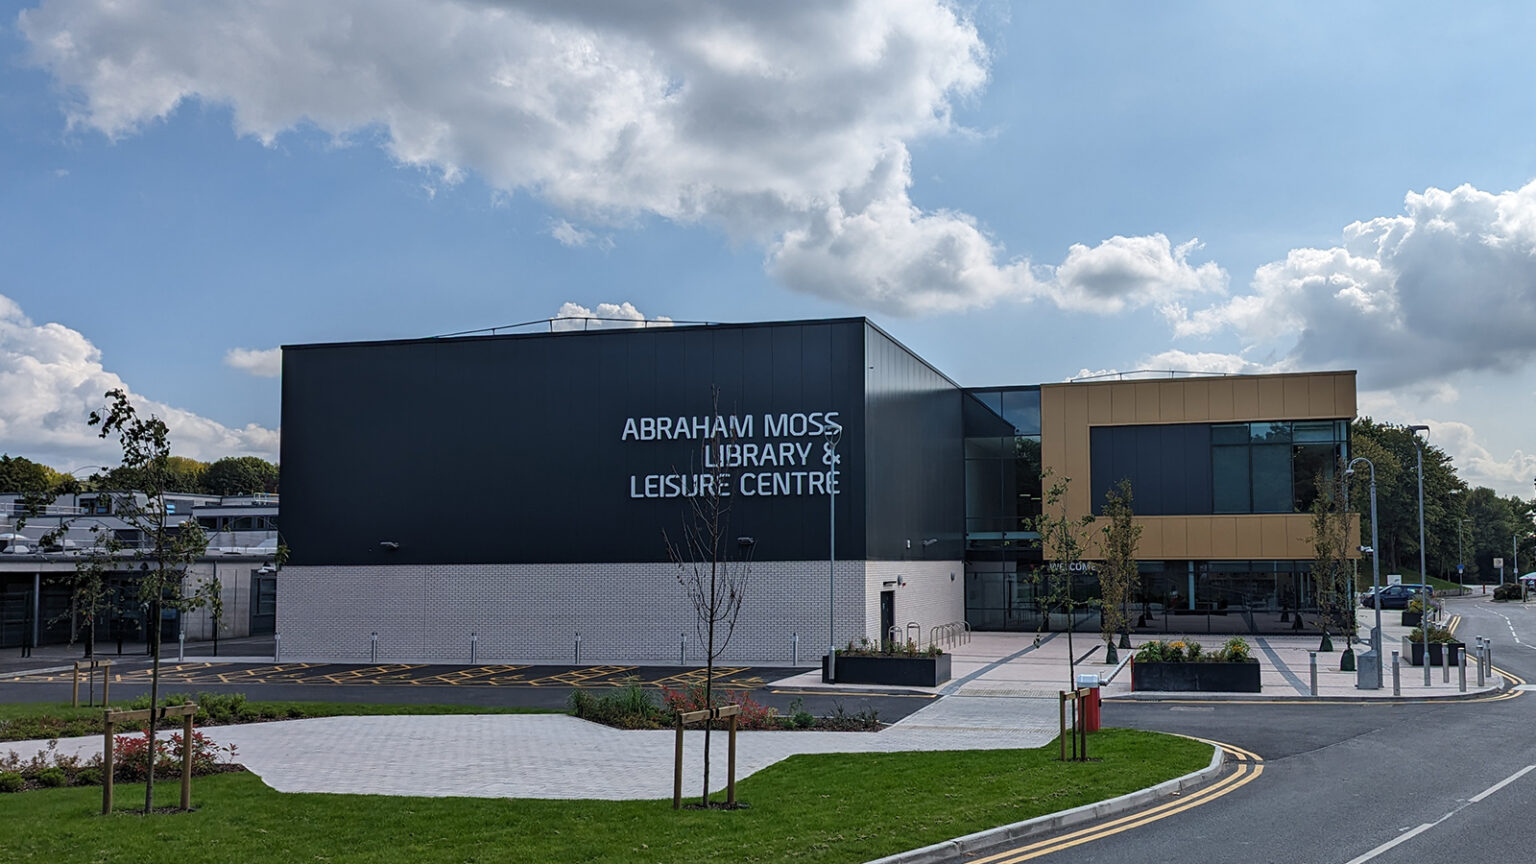 Abraham Moss Library and Leisure Centre